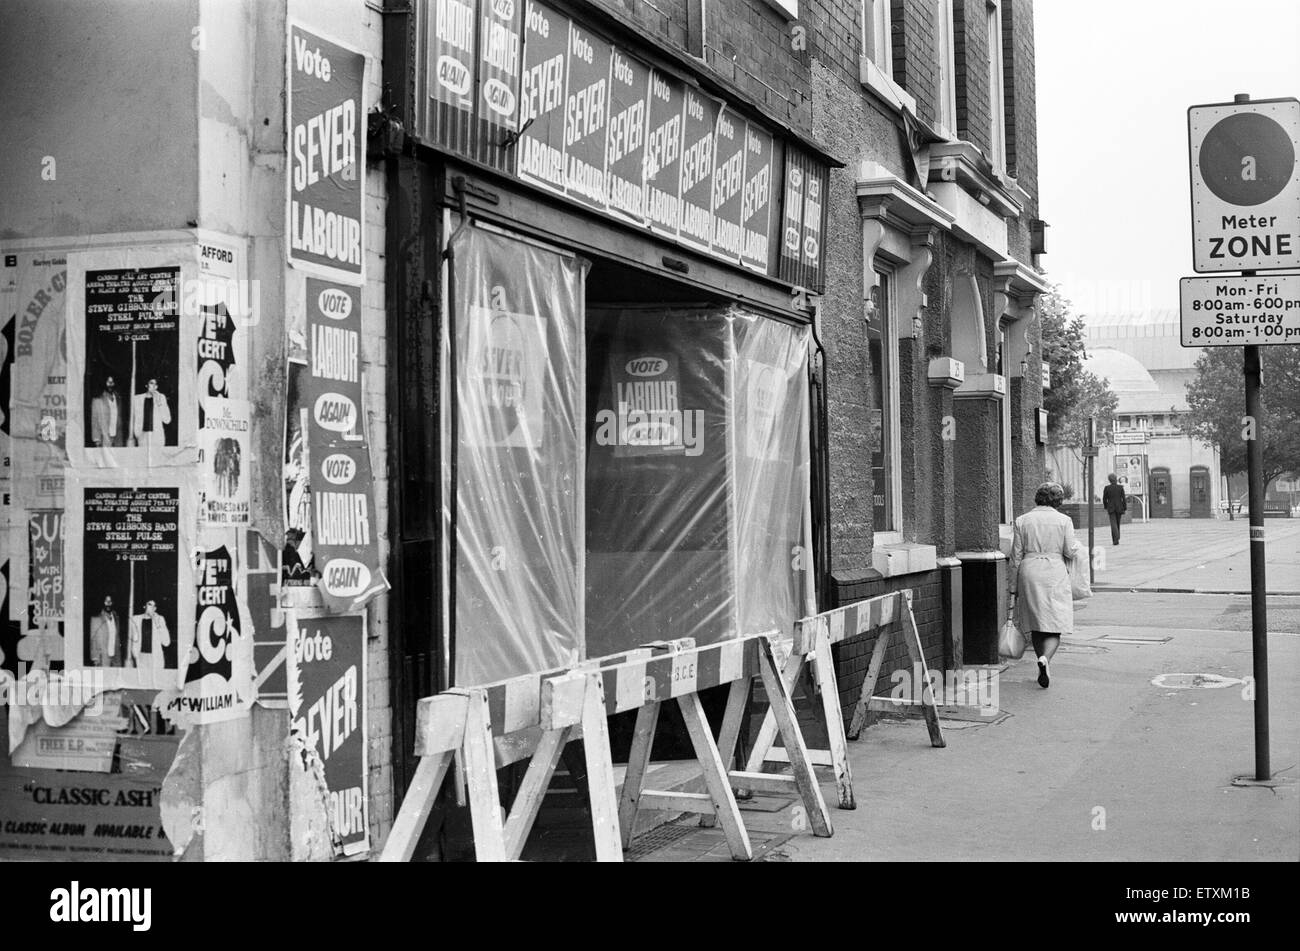 Labour Headquarters damaged during demonstrations, Ladywood, Birmingham, 15th August 1977. By-election, to be held on 18th August 1977. Stock Photo